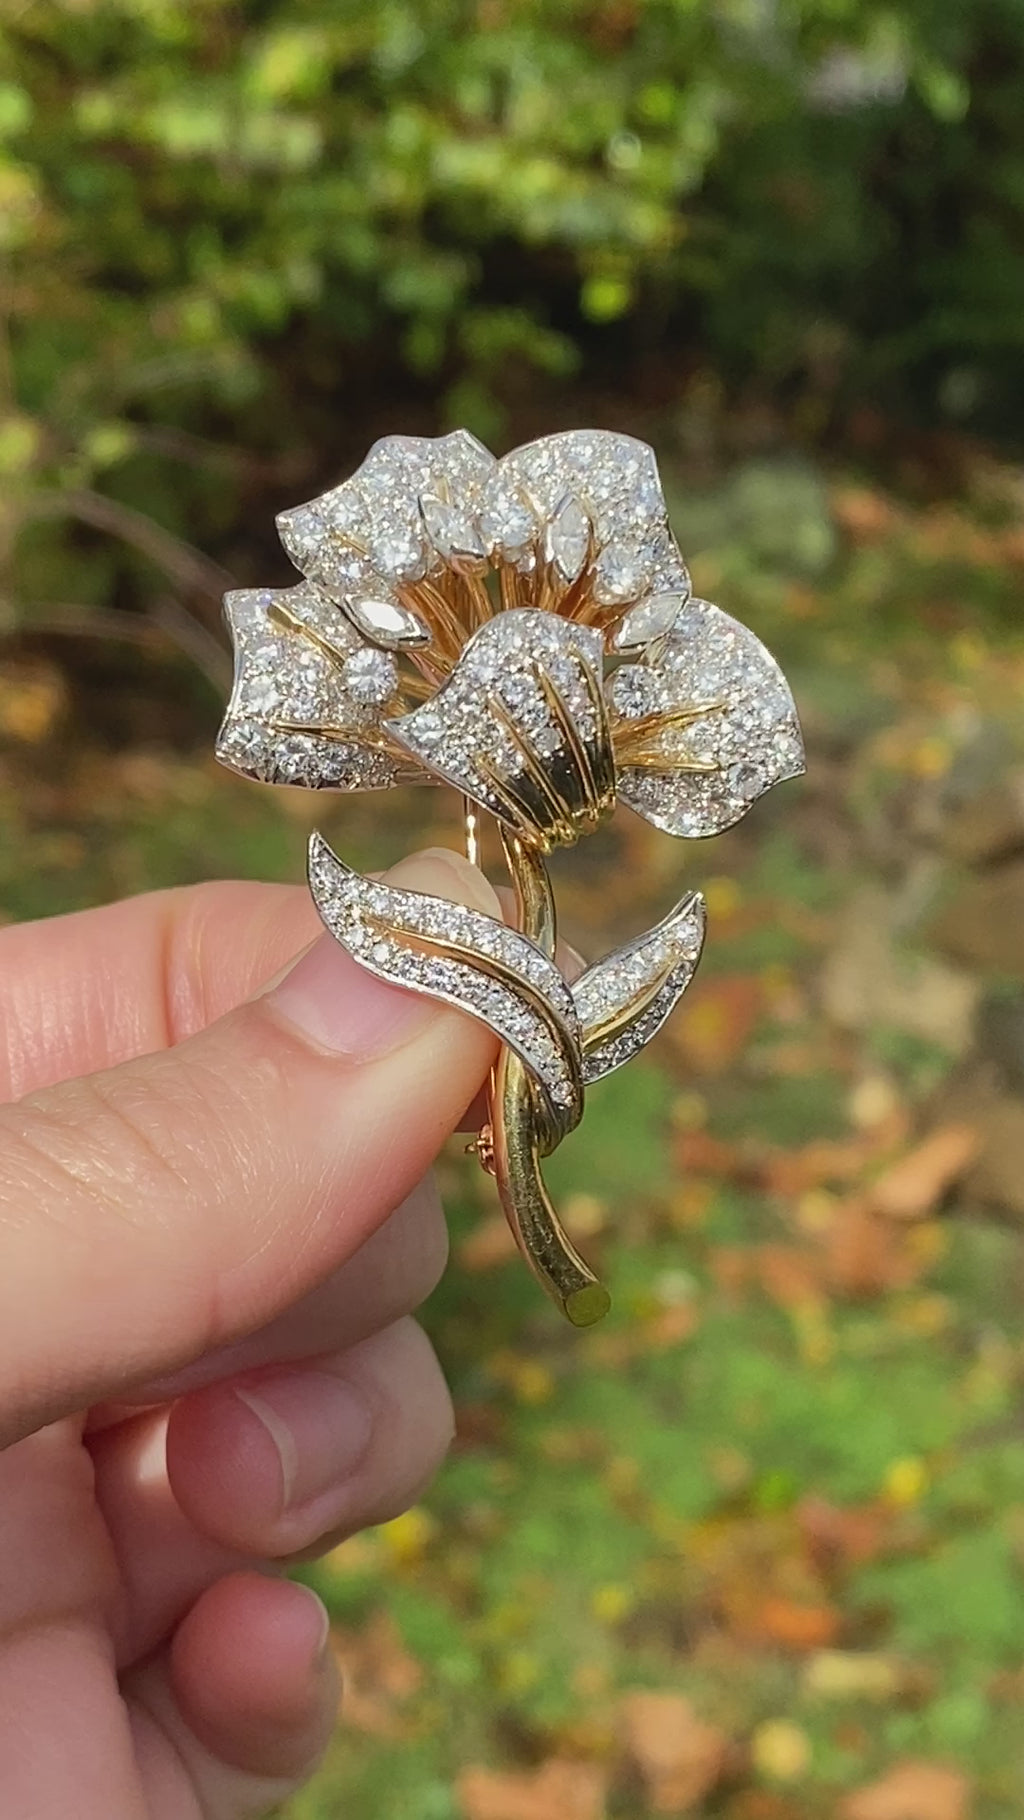 where can i find diamond pins for flowers｜TikTok Search